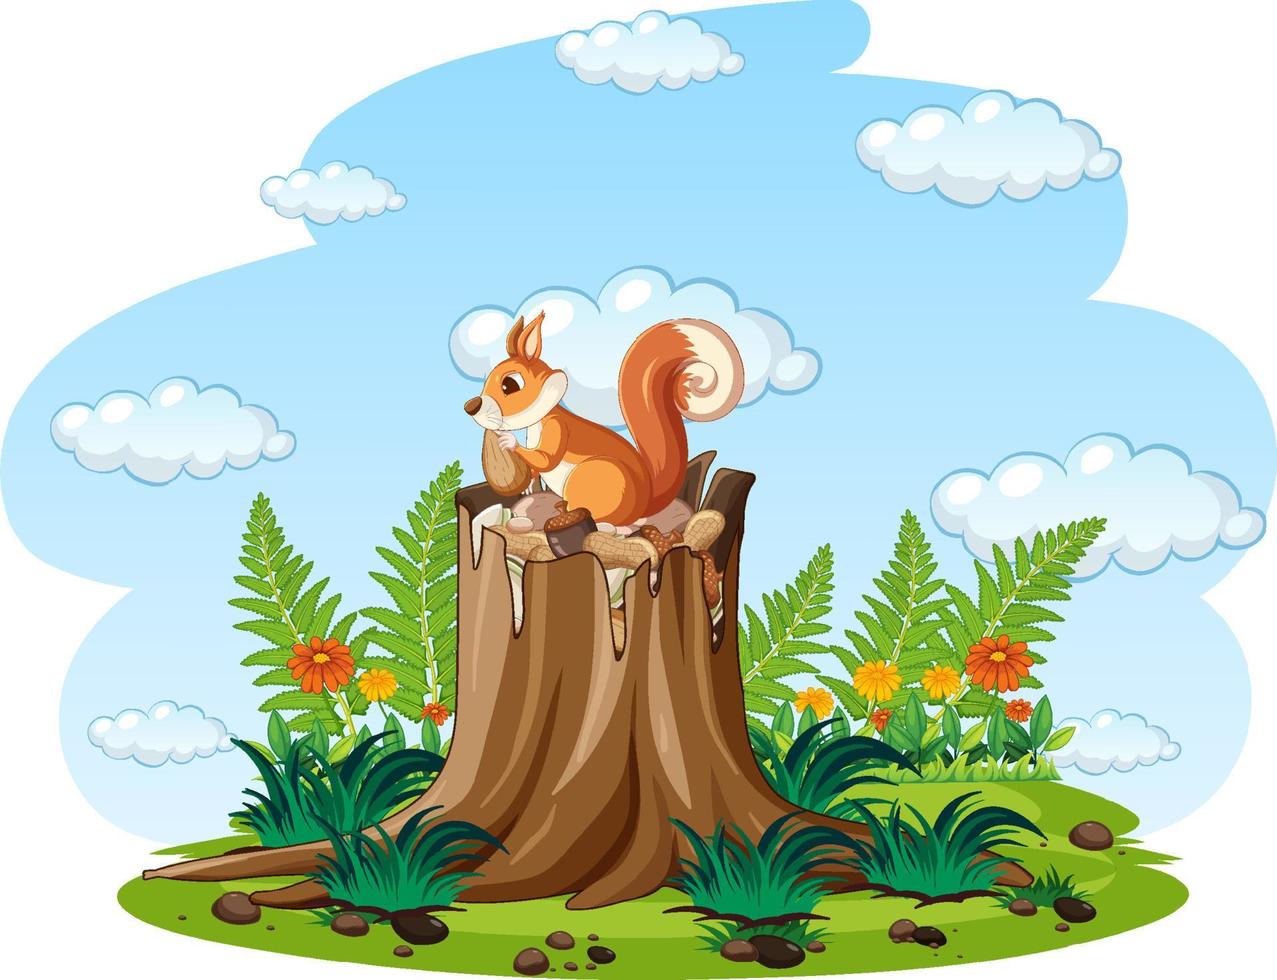 Brown squirrel eating nuts in the garden vector